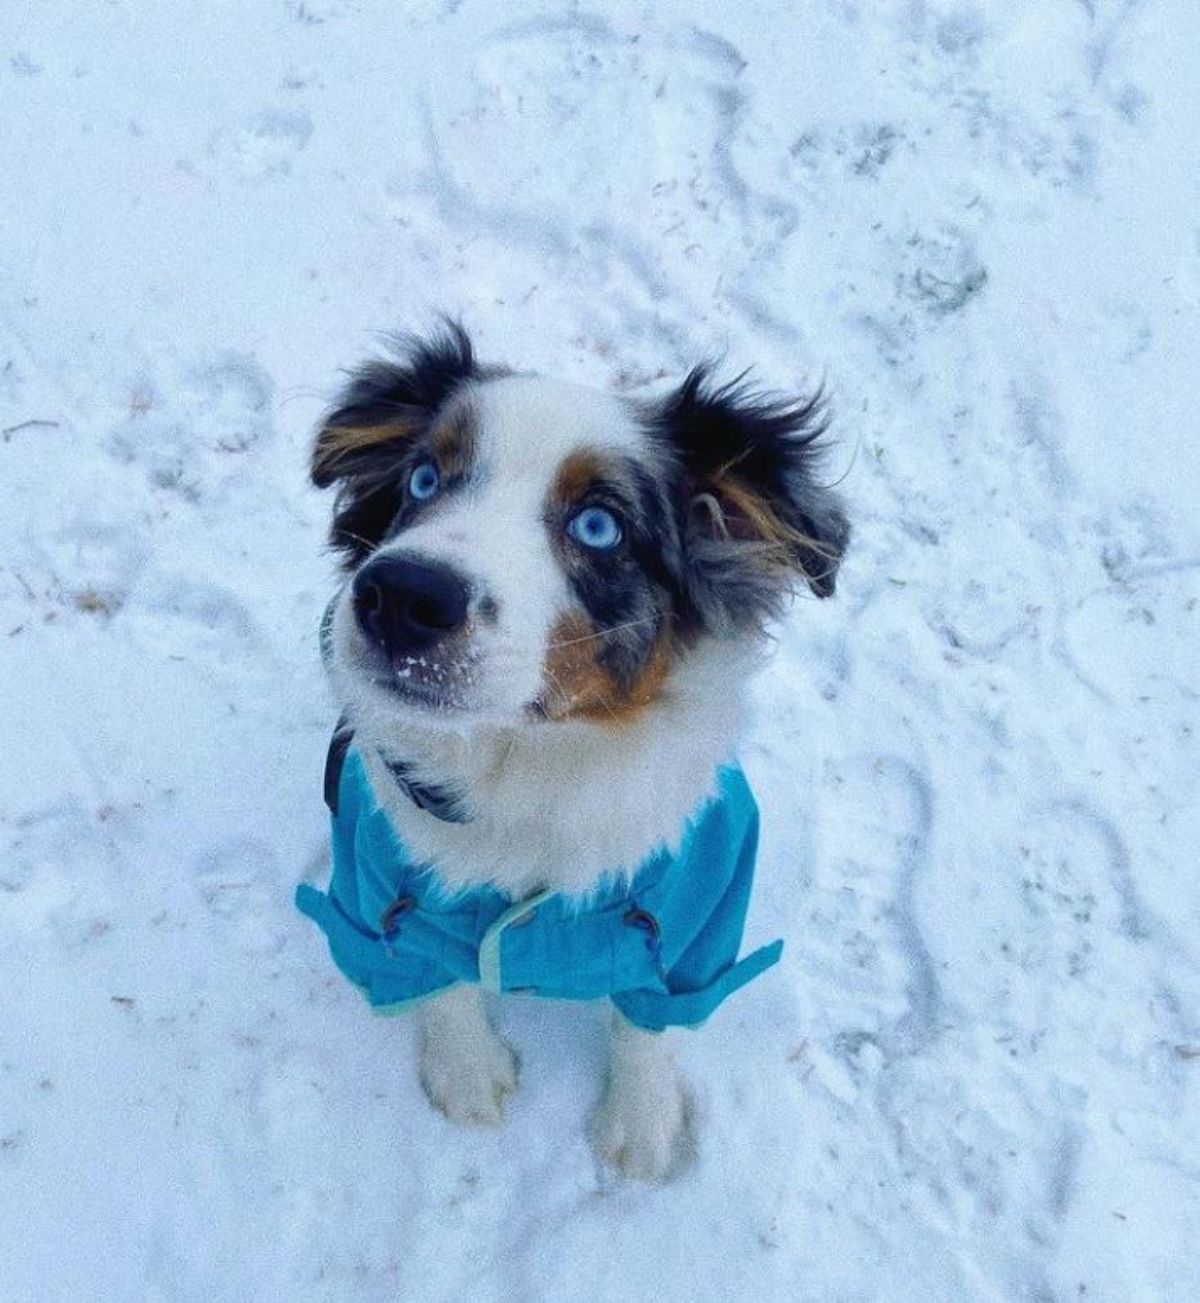 white black and brown sutralian shepherd puppy sitting in snow wearing a blue coat